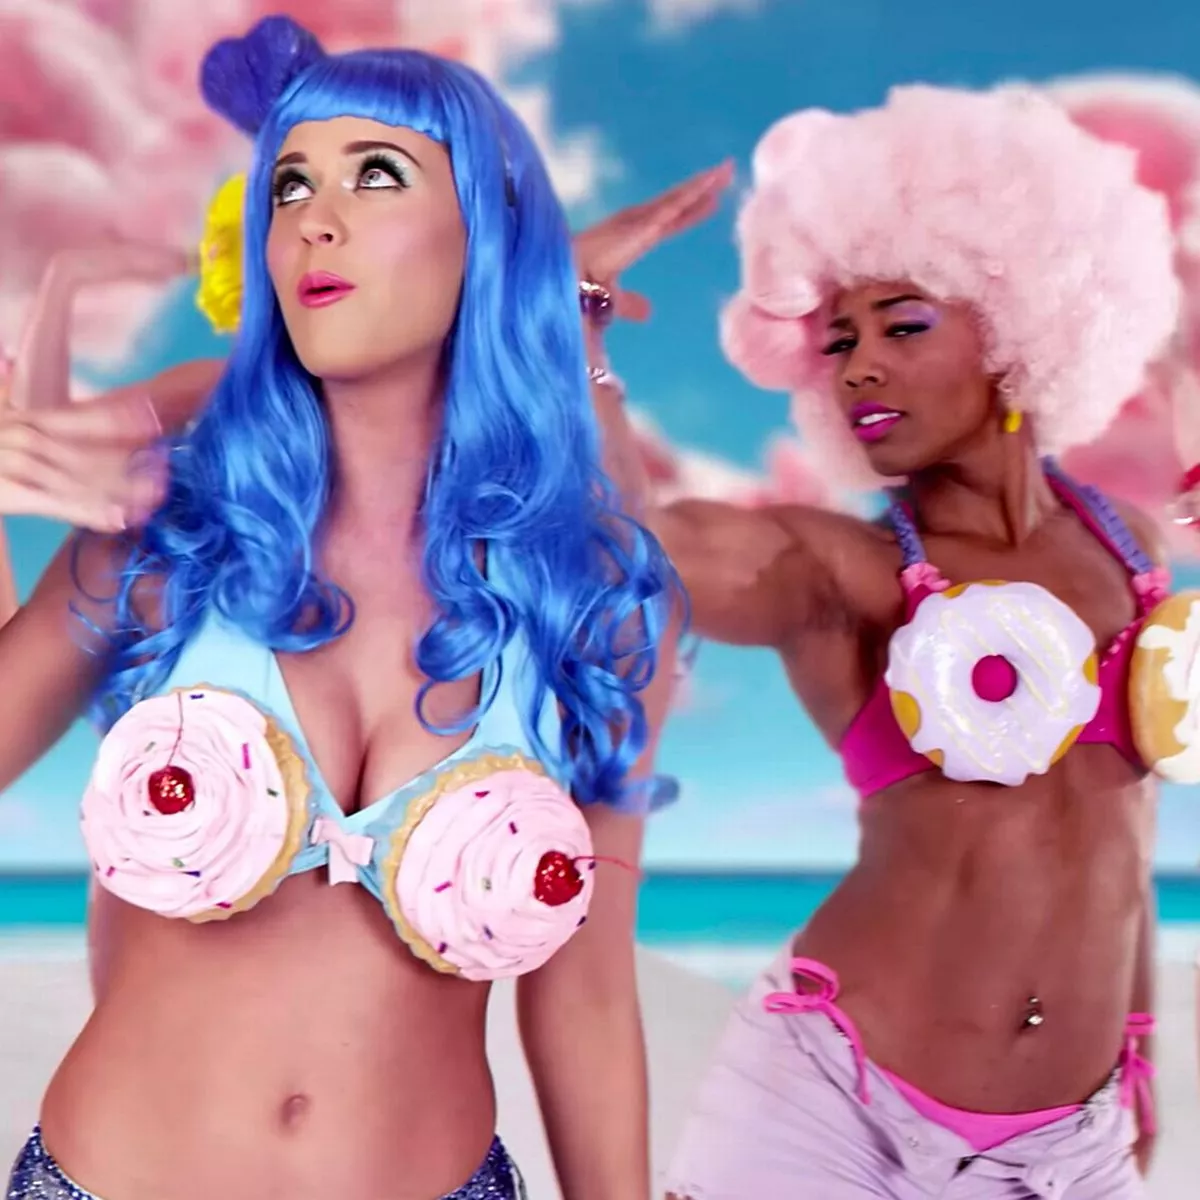 Best of Katy perry tits tumblr